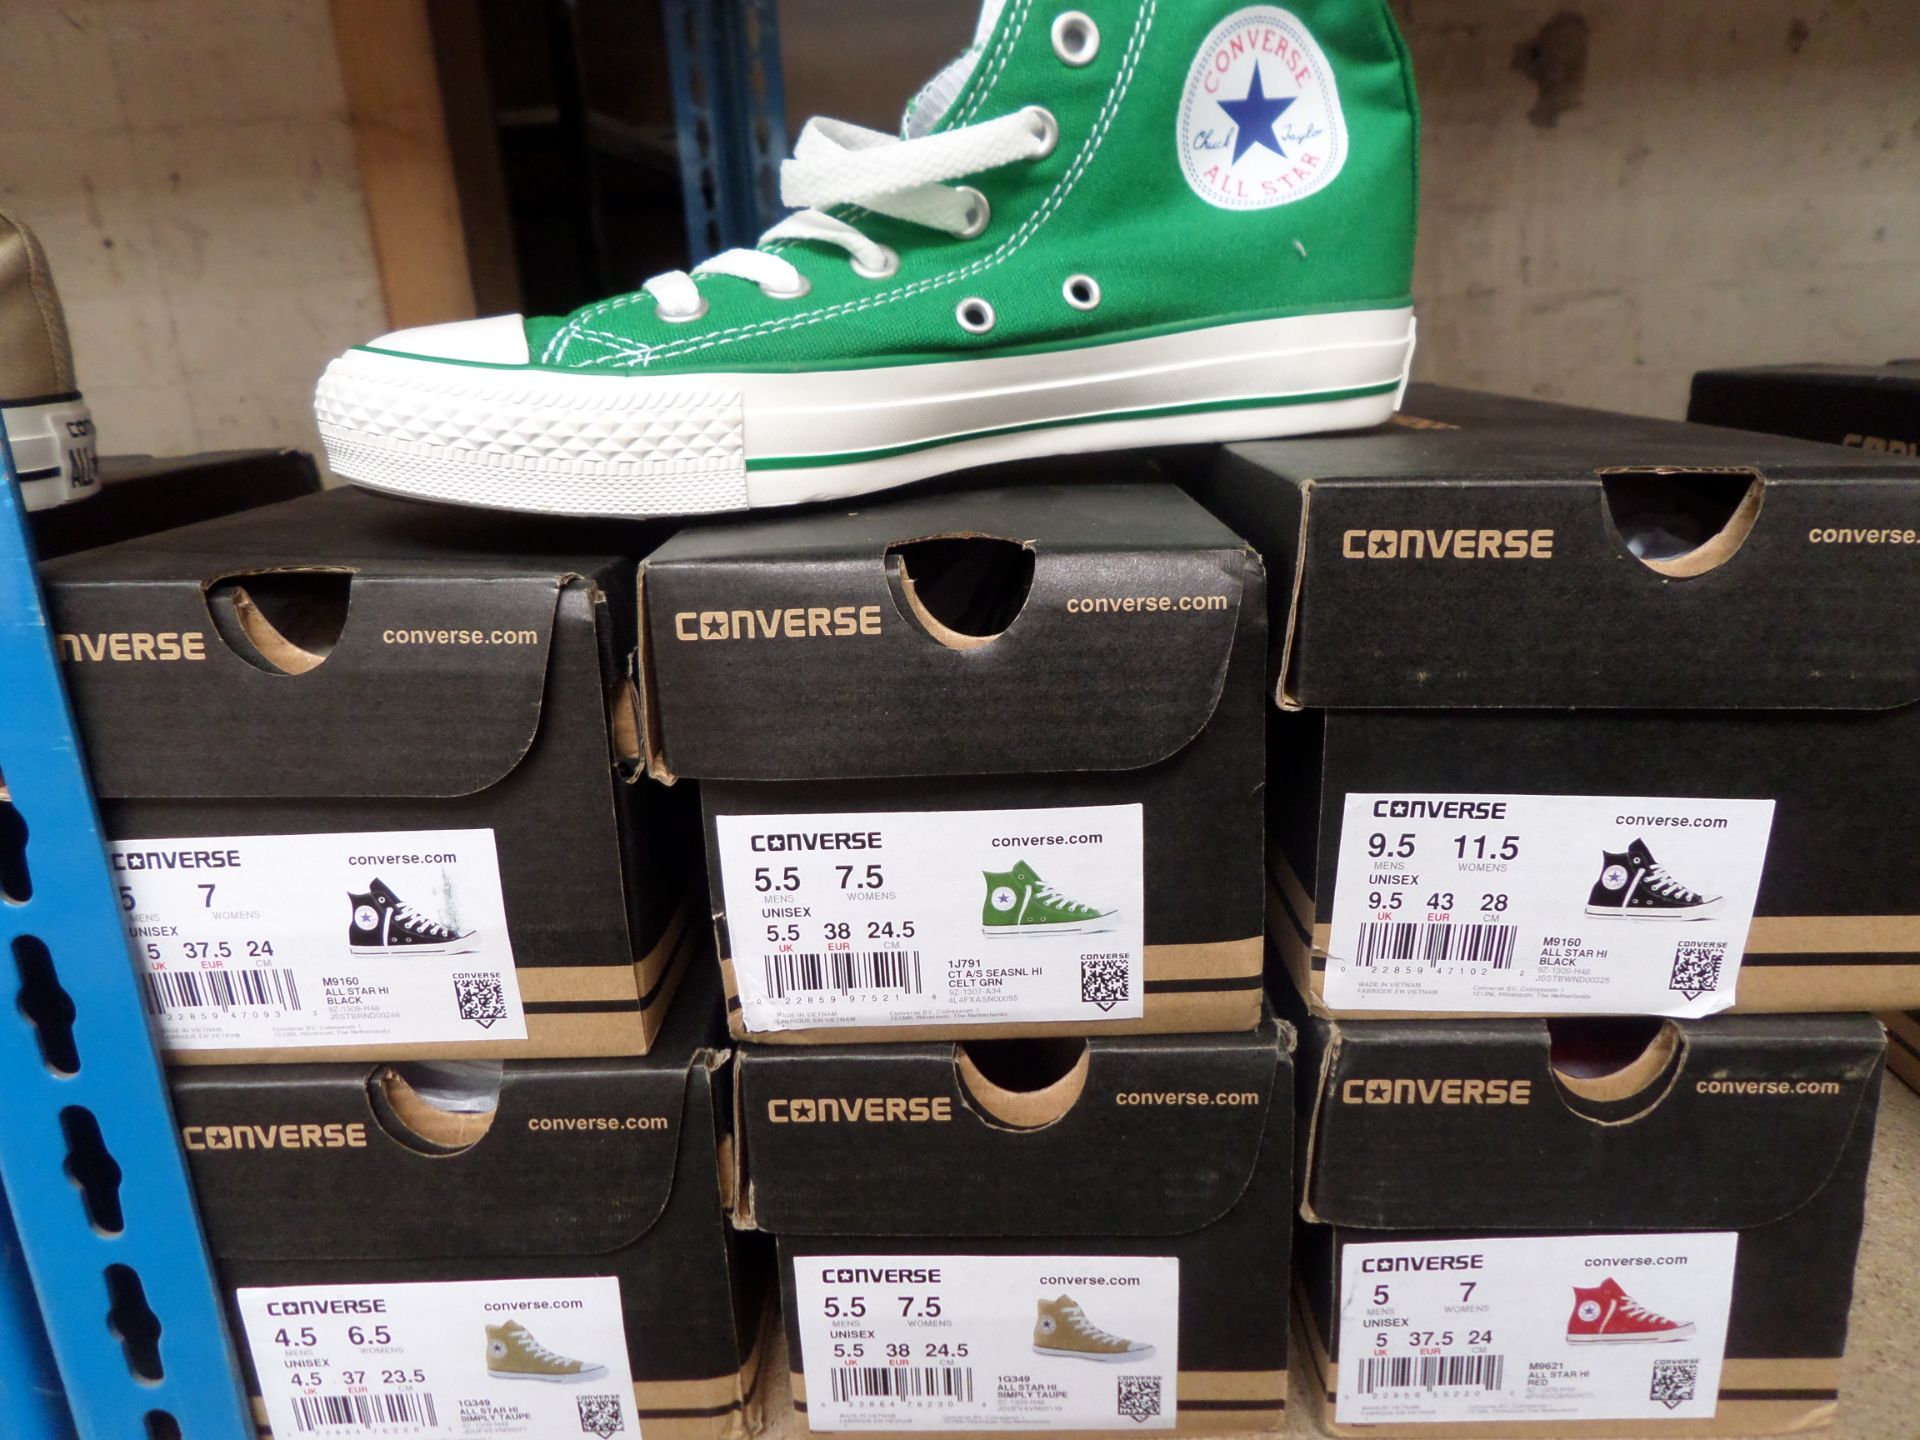 6 X Converse All Star Hip Top Canvass Trainers Various Colours Sizes 4.5-9.5 (New)